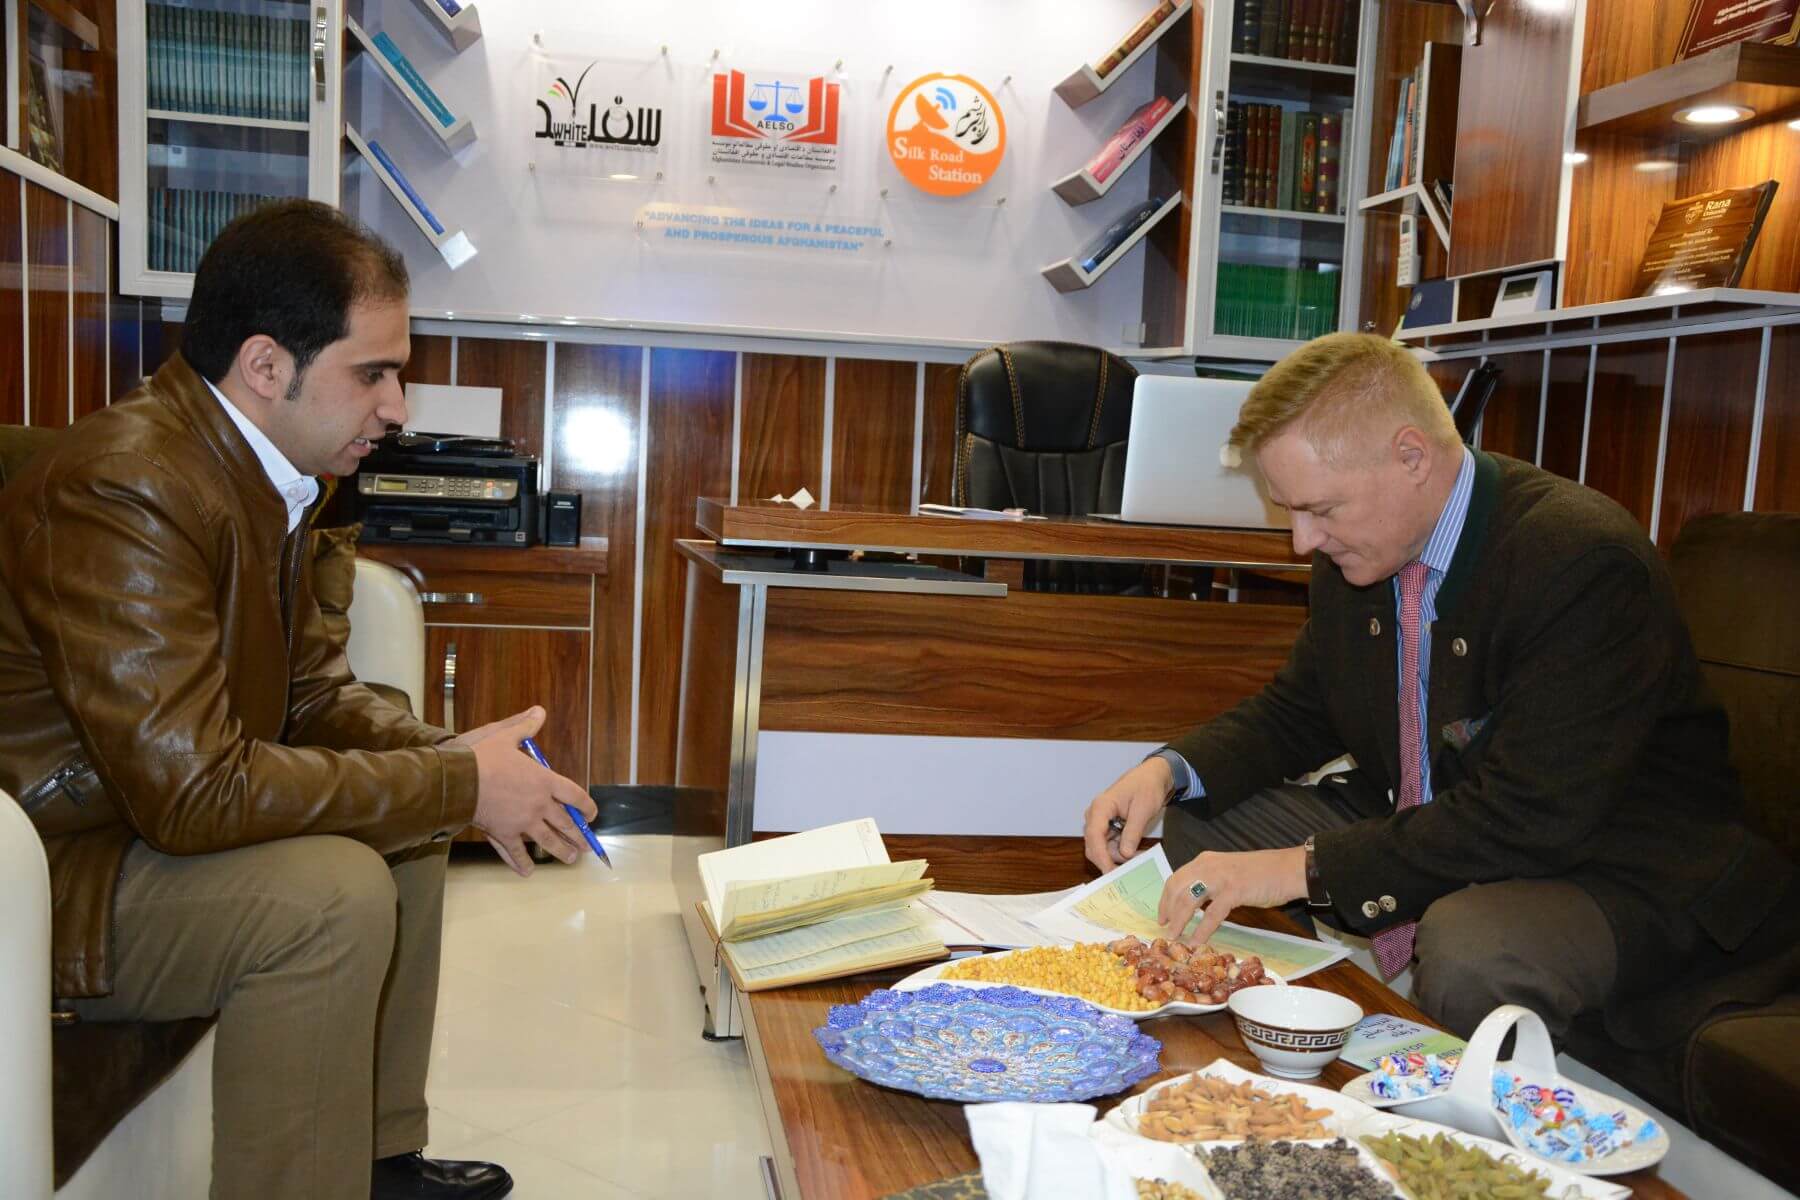 Dr. Tom G. Palmer discussing about the new initiatives of AELSO with Mr. Khalid Ramizy CEO of AELSO